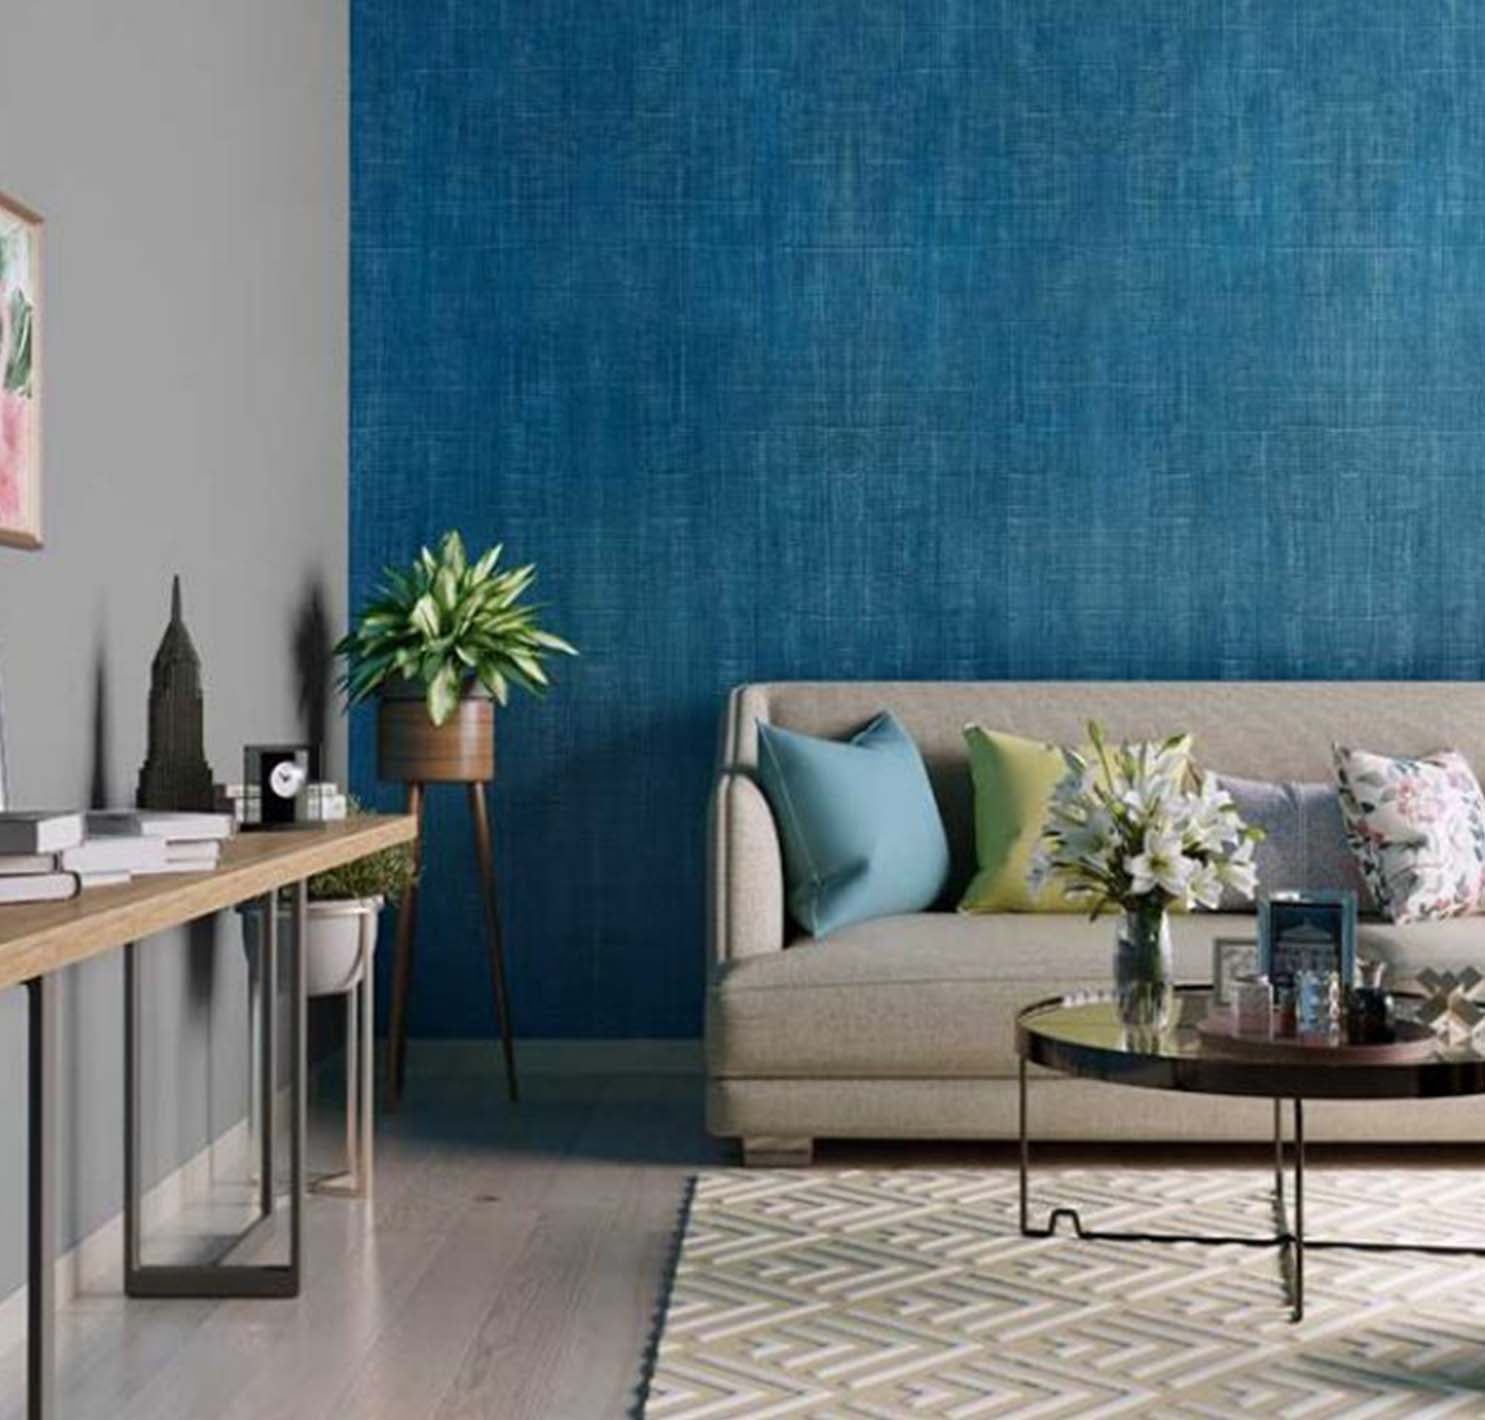 Asian Paints Royale Play Jute texture By ColourDrive | Design Ideas,  Textures Ideas & Inspiration for Home and Office Painting